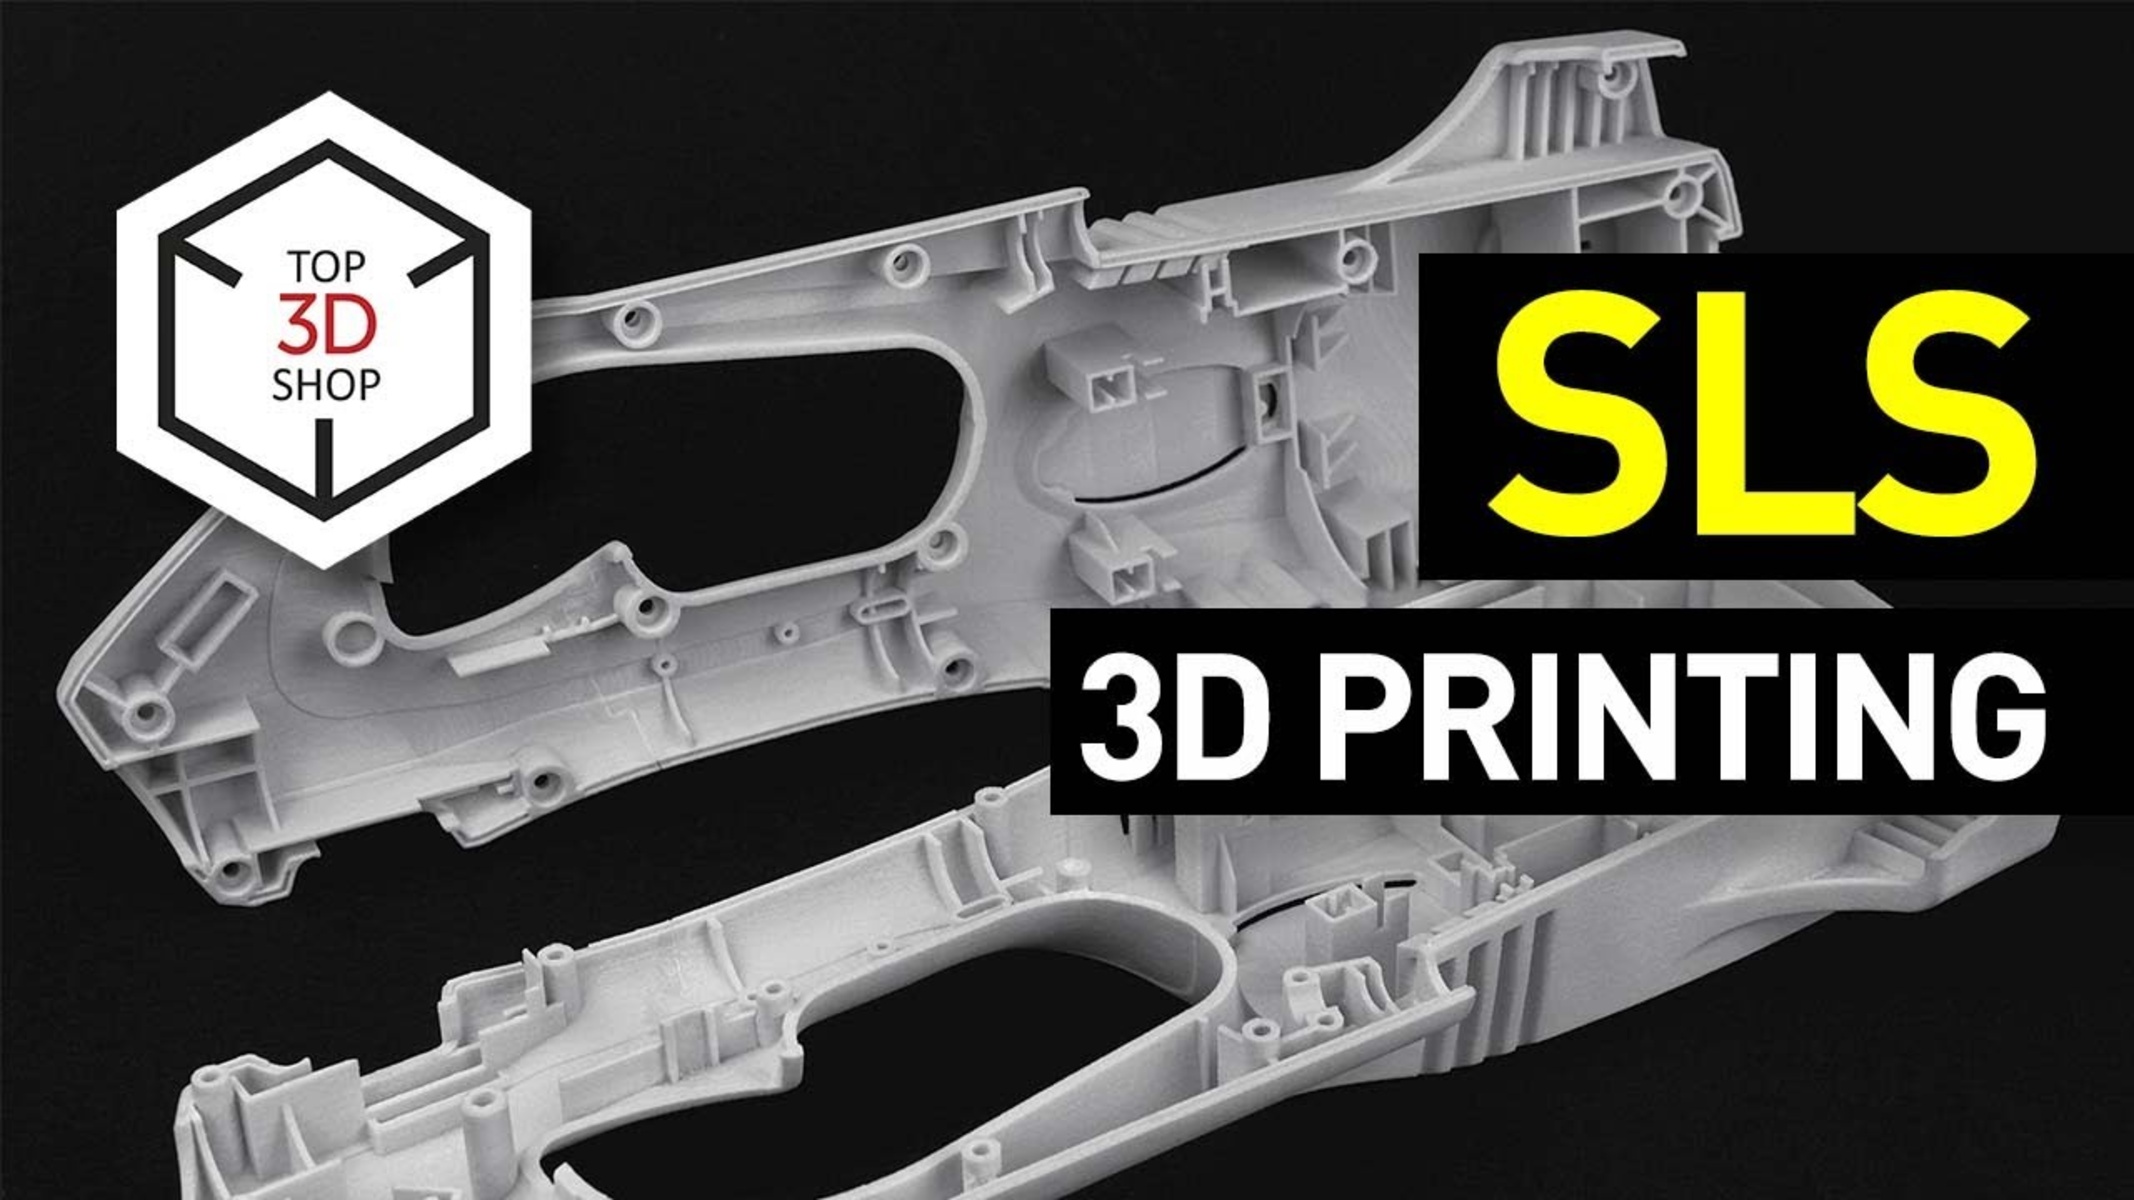 What Is Sls 3D Printing